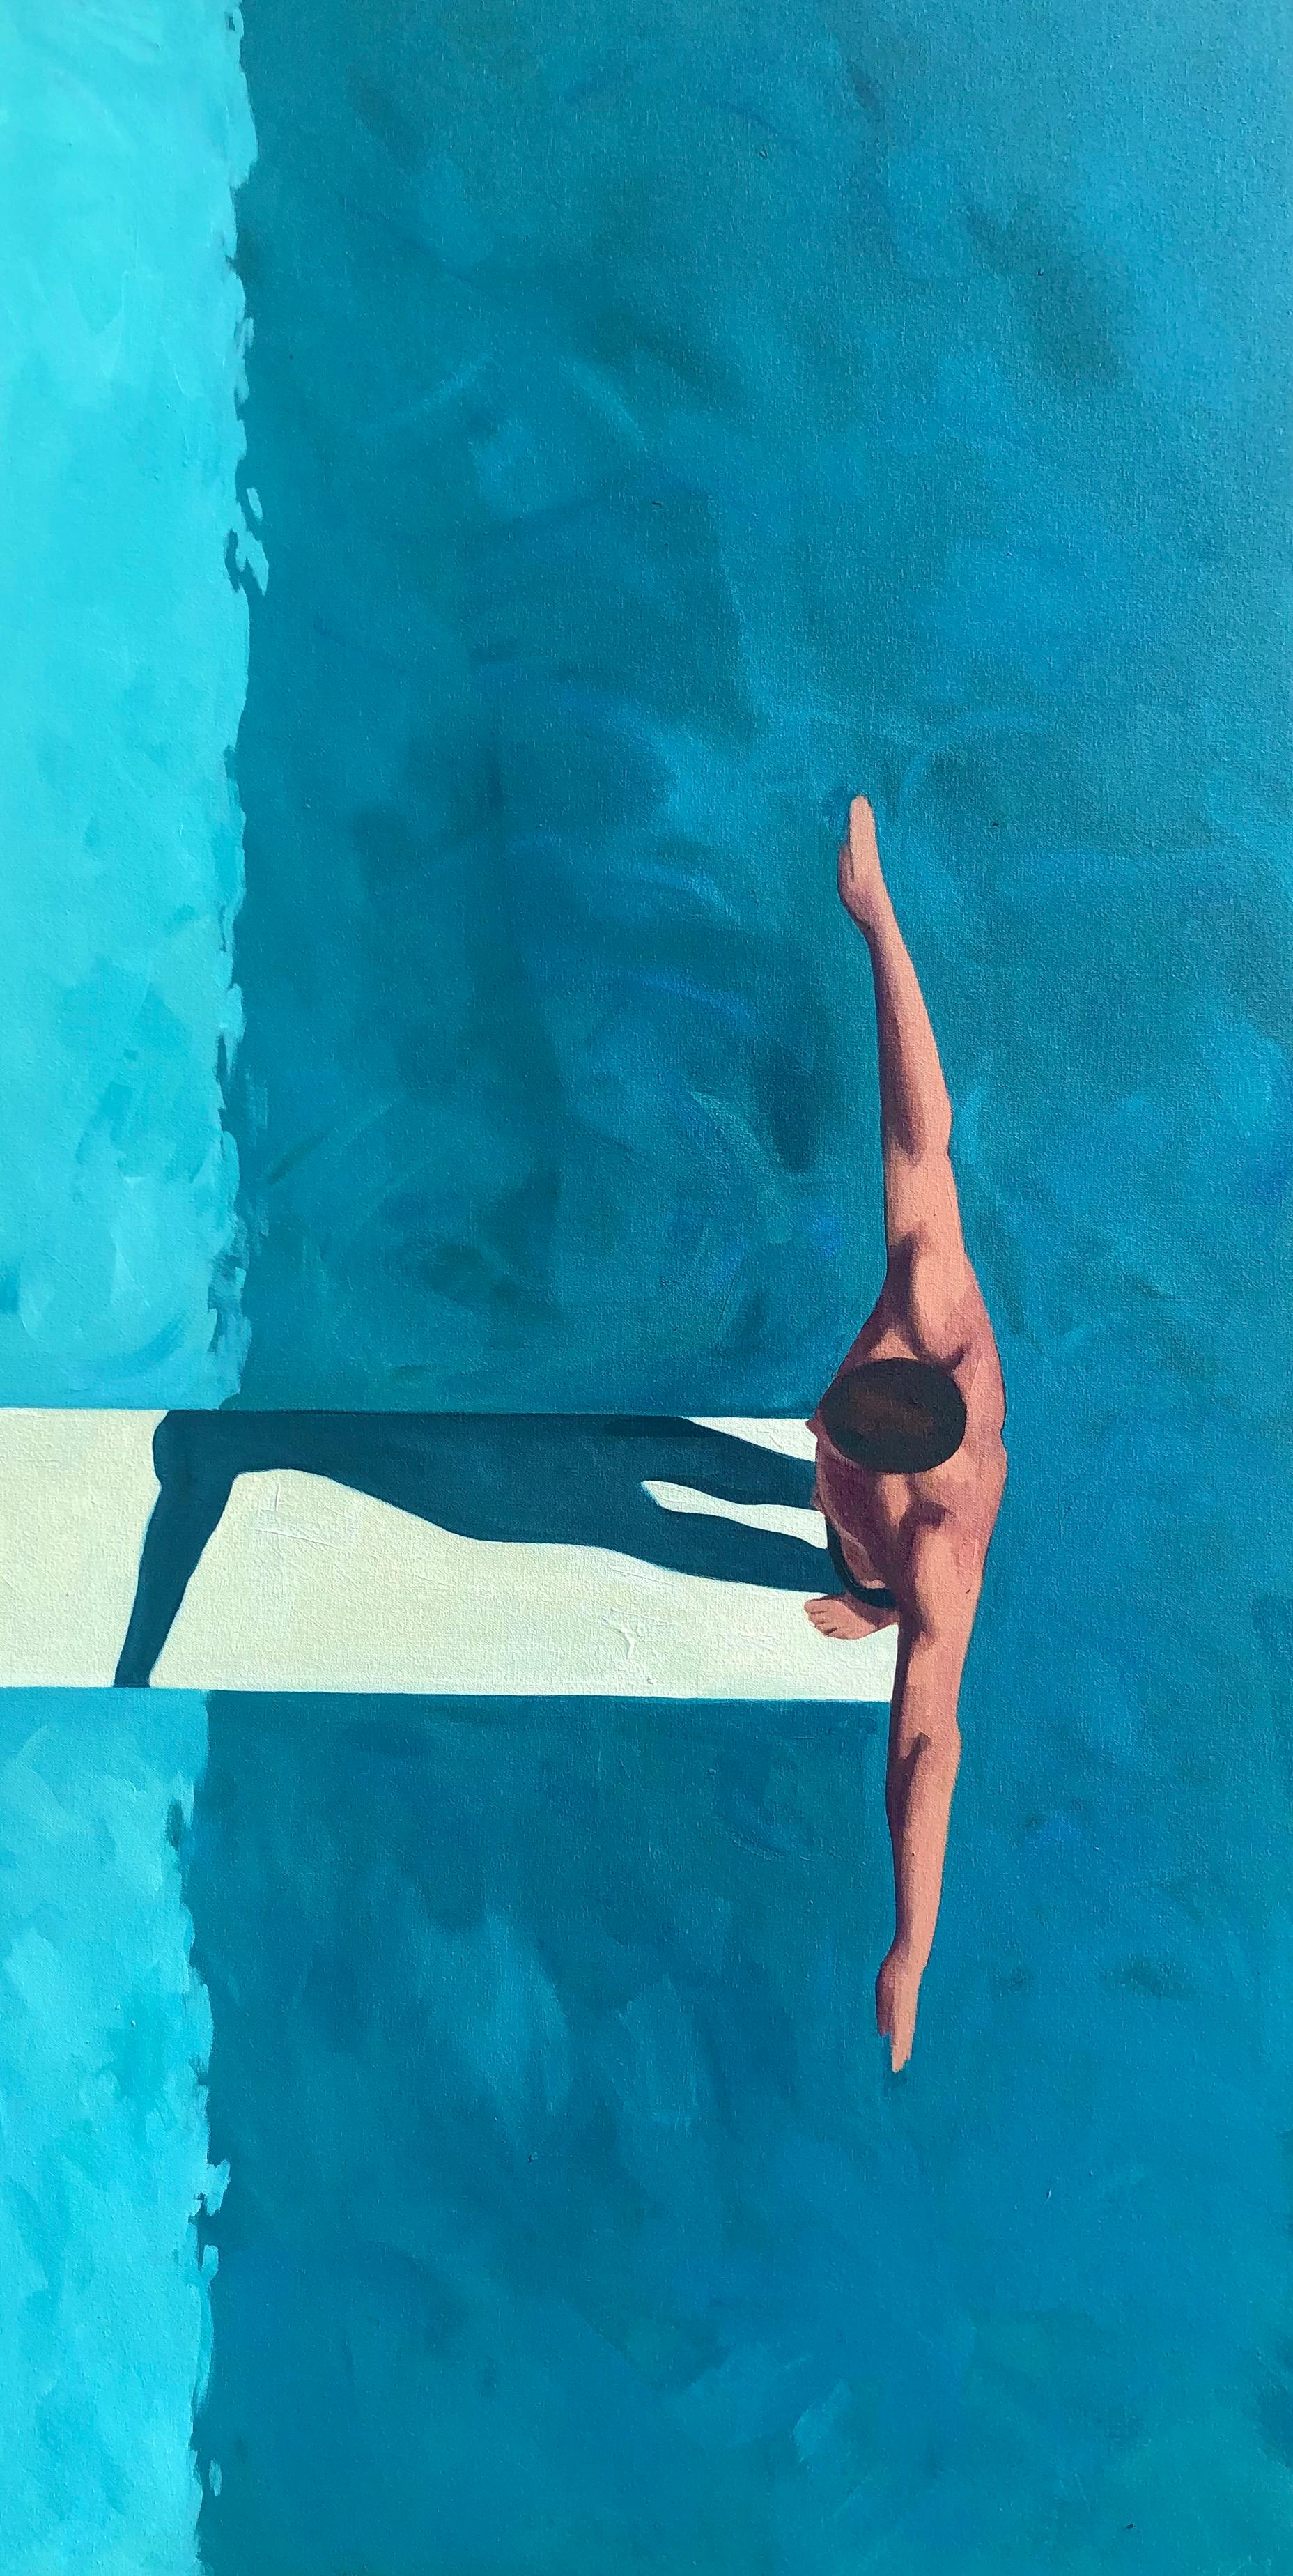 T.S. Harris Figurative Painting - "Diving Man II" vertical oil painting of a diver over turquoise pool from above